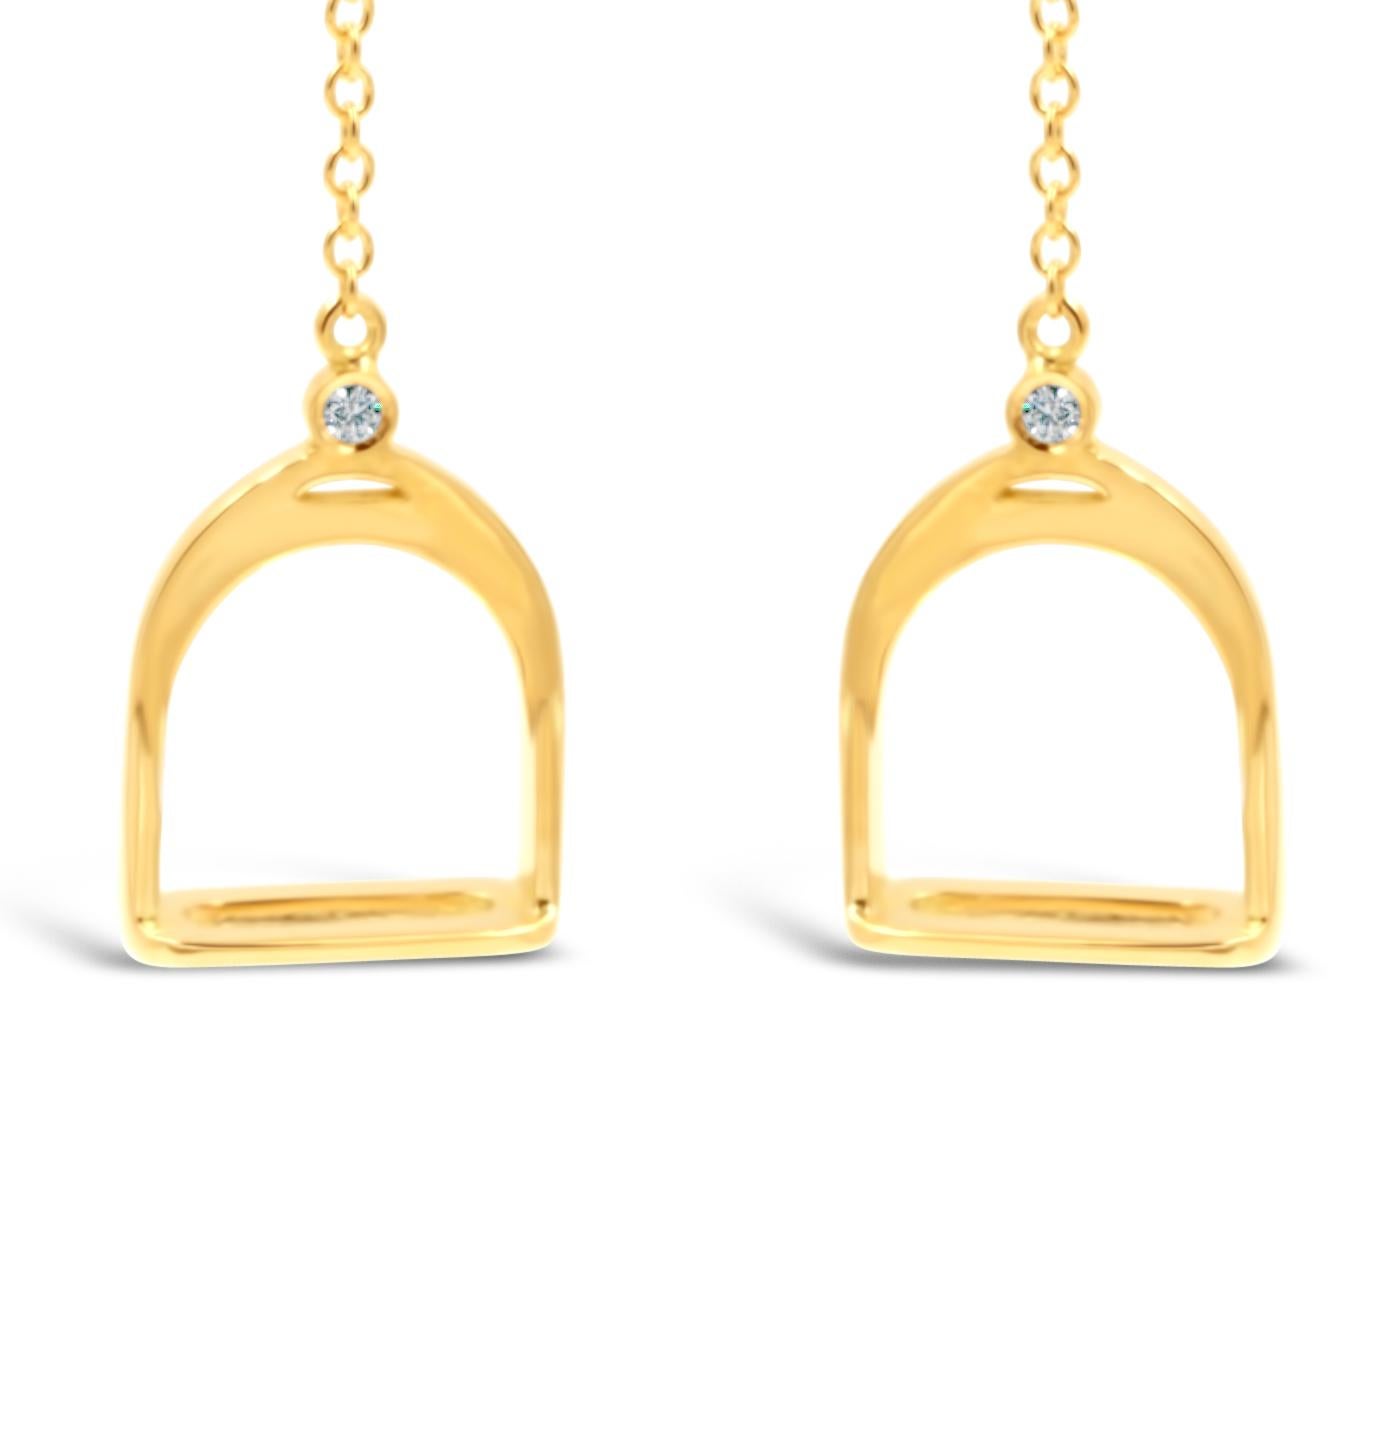 Round Cut Garavelli 18 Kt Yellow Gold Brown Diamonds Stirrups Collection Dangling Earrings For Sale